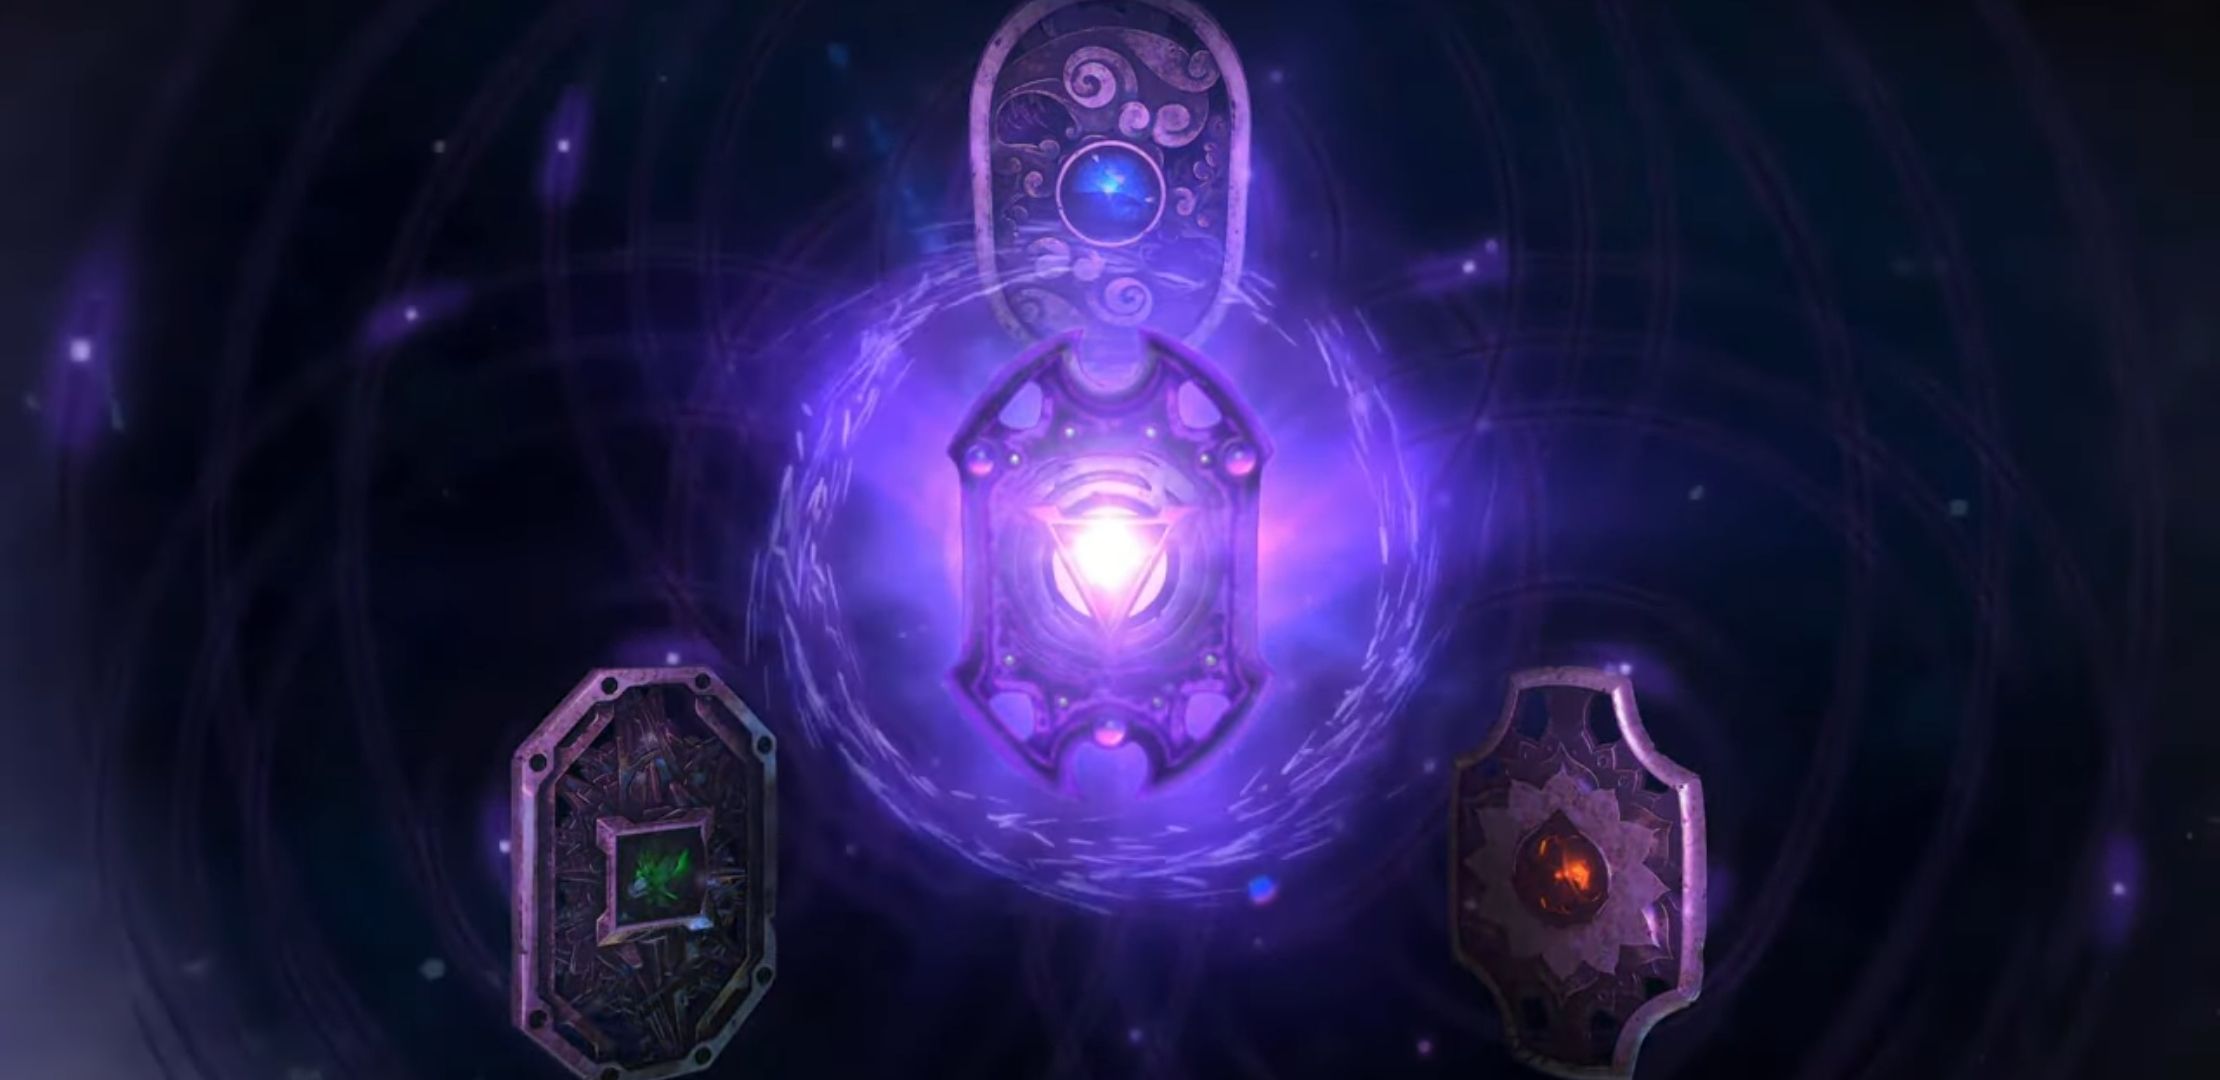 New Dota 2 hero Void Spirit: release date and details